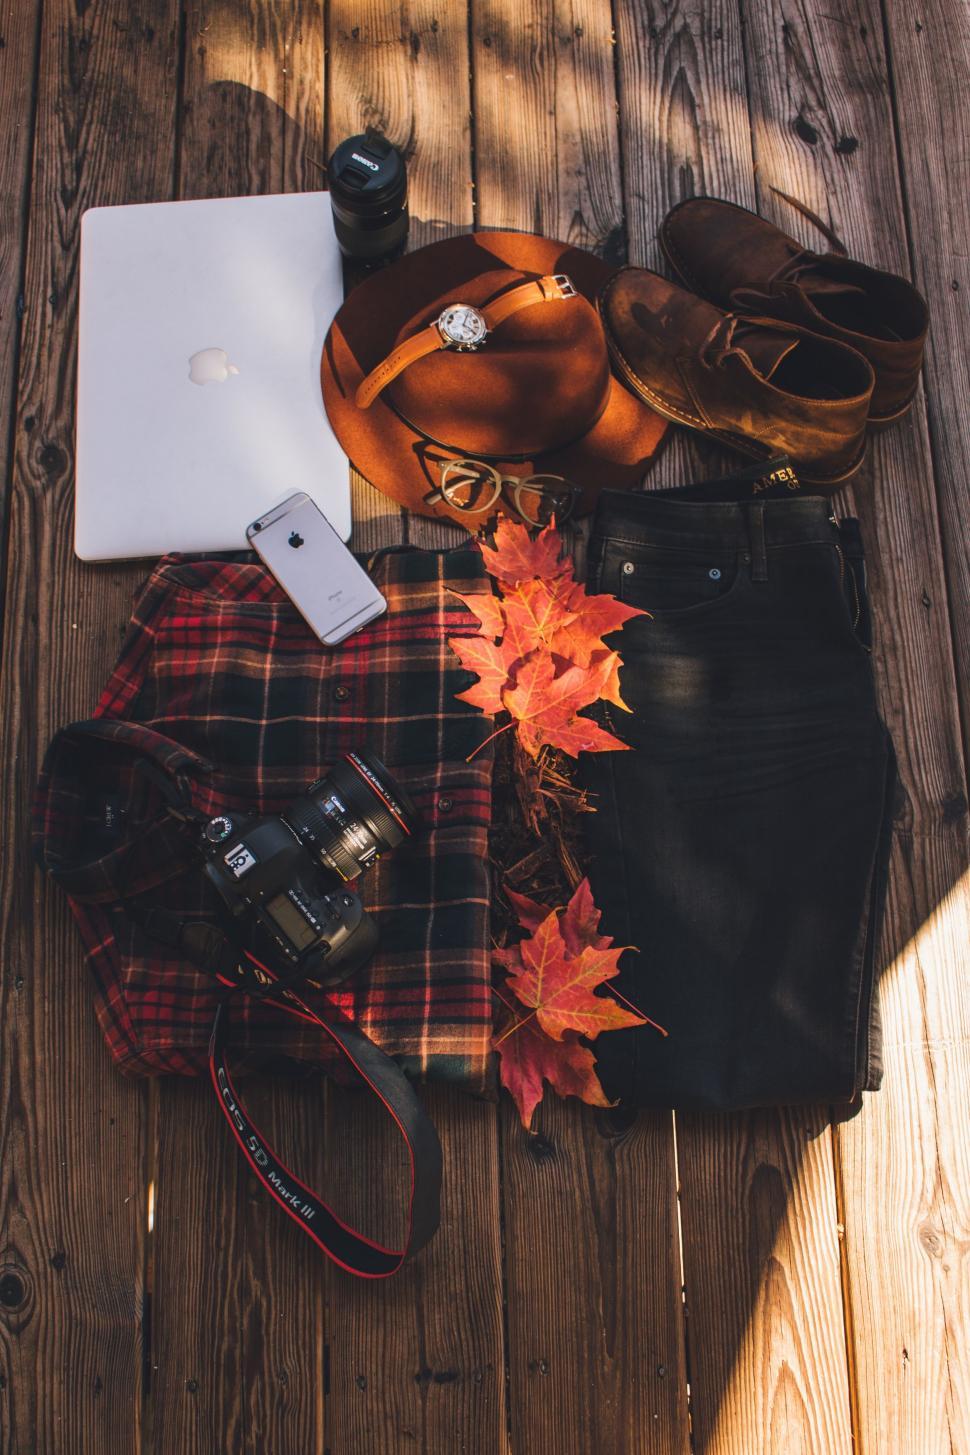 Free Image of Clothes and gadgets with red maple leaves  